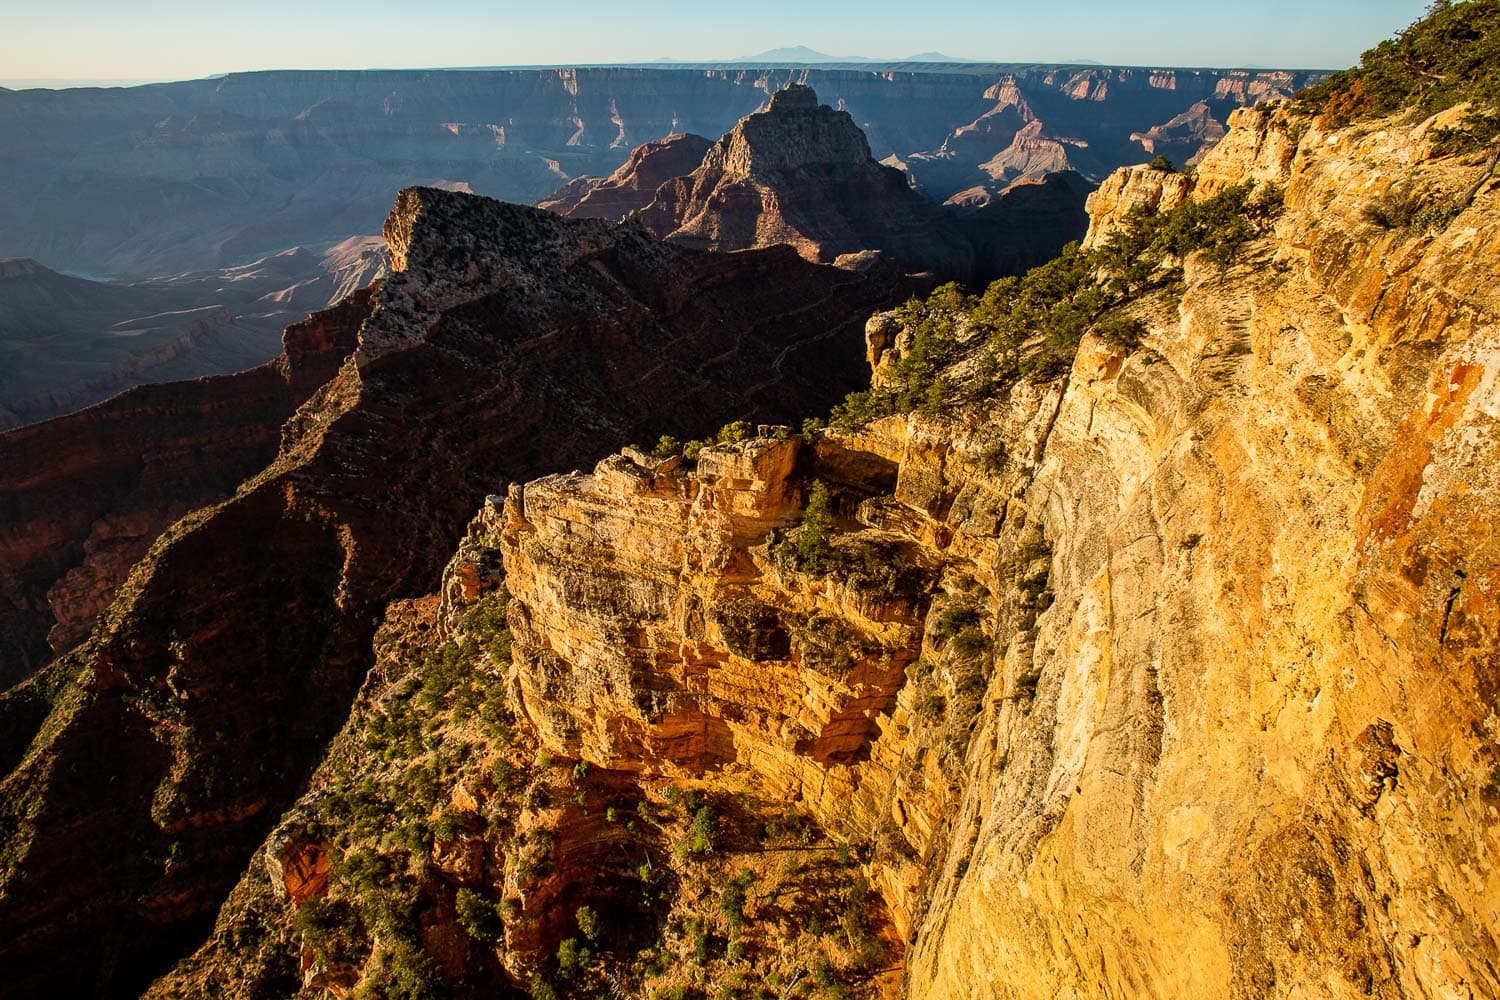 Sunrise lights up the north wall of the Grand Canyon.